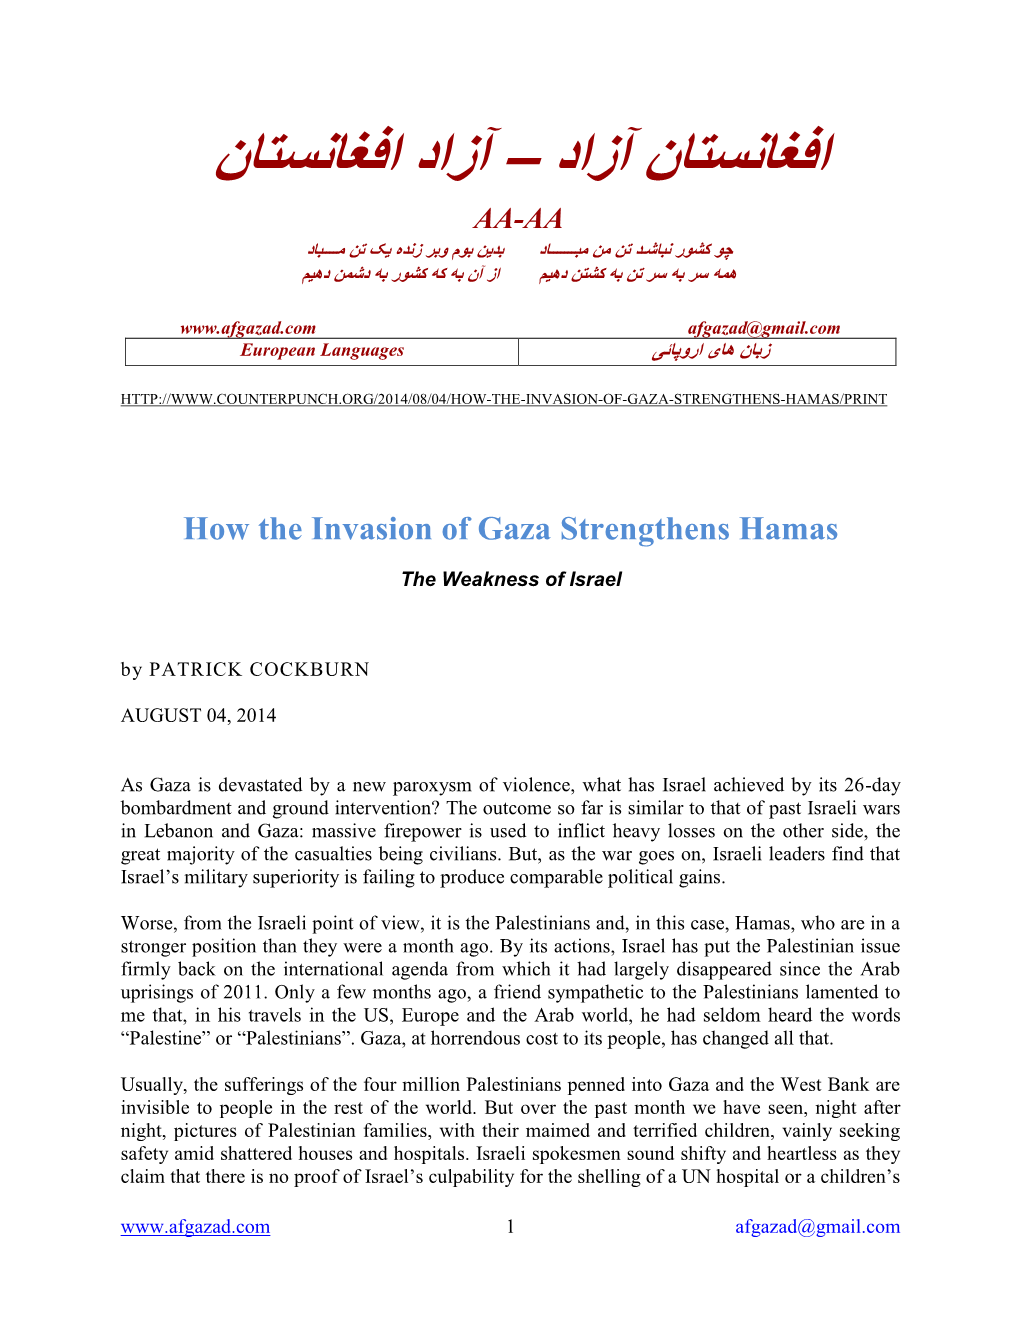 How the Invasion of Gaza Strengthens Hamas